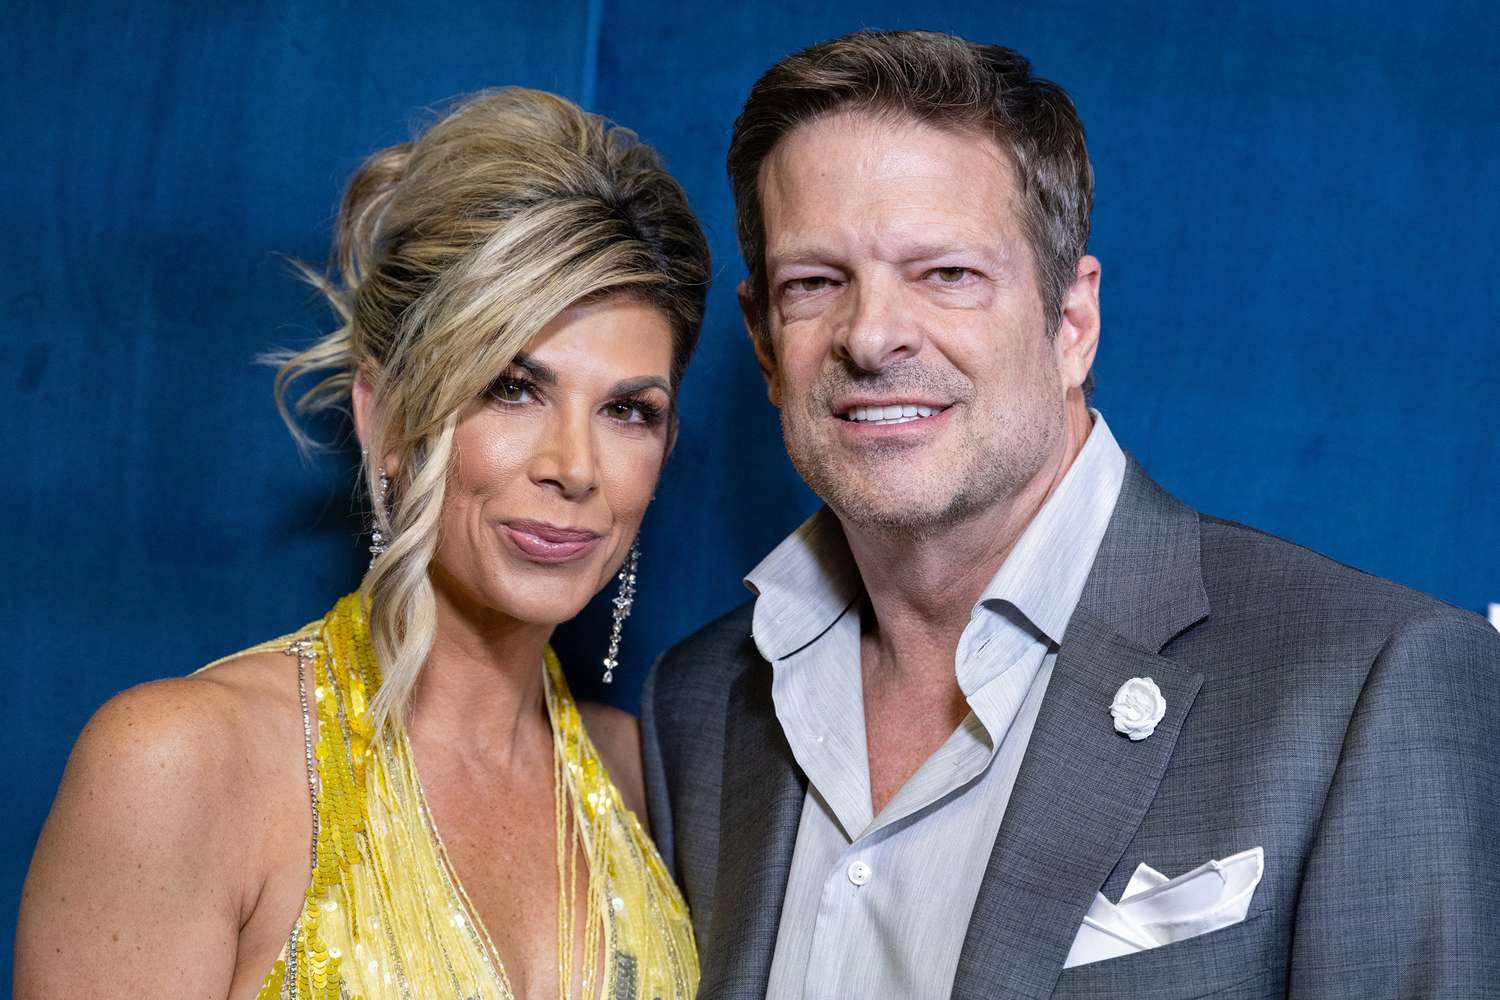 'RHOC’s Alexis Bellino Admits She Needs ‘Vaginal Rejuvenation' After Having Sex with John Janssen More Than '4 Times a Day’